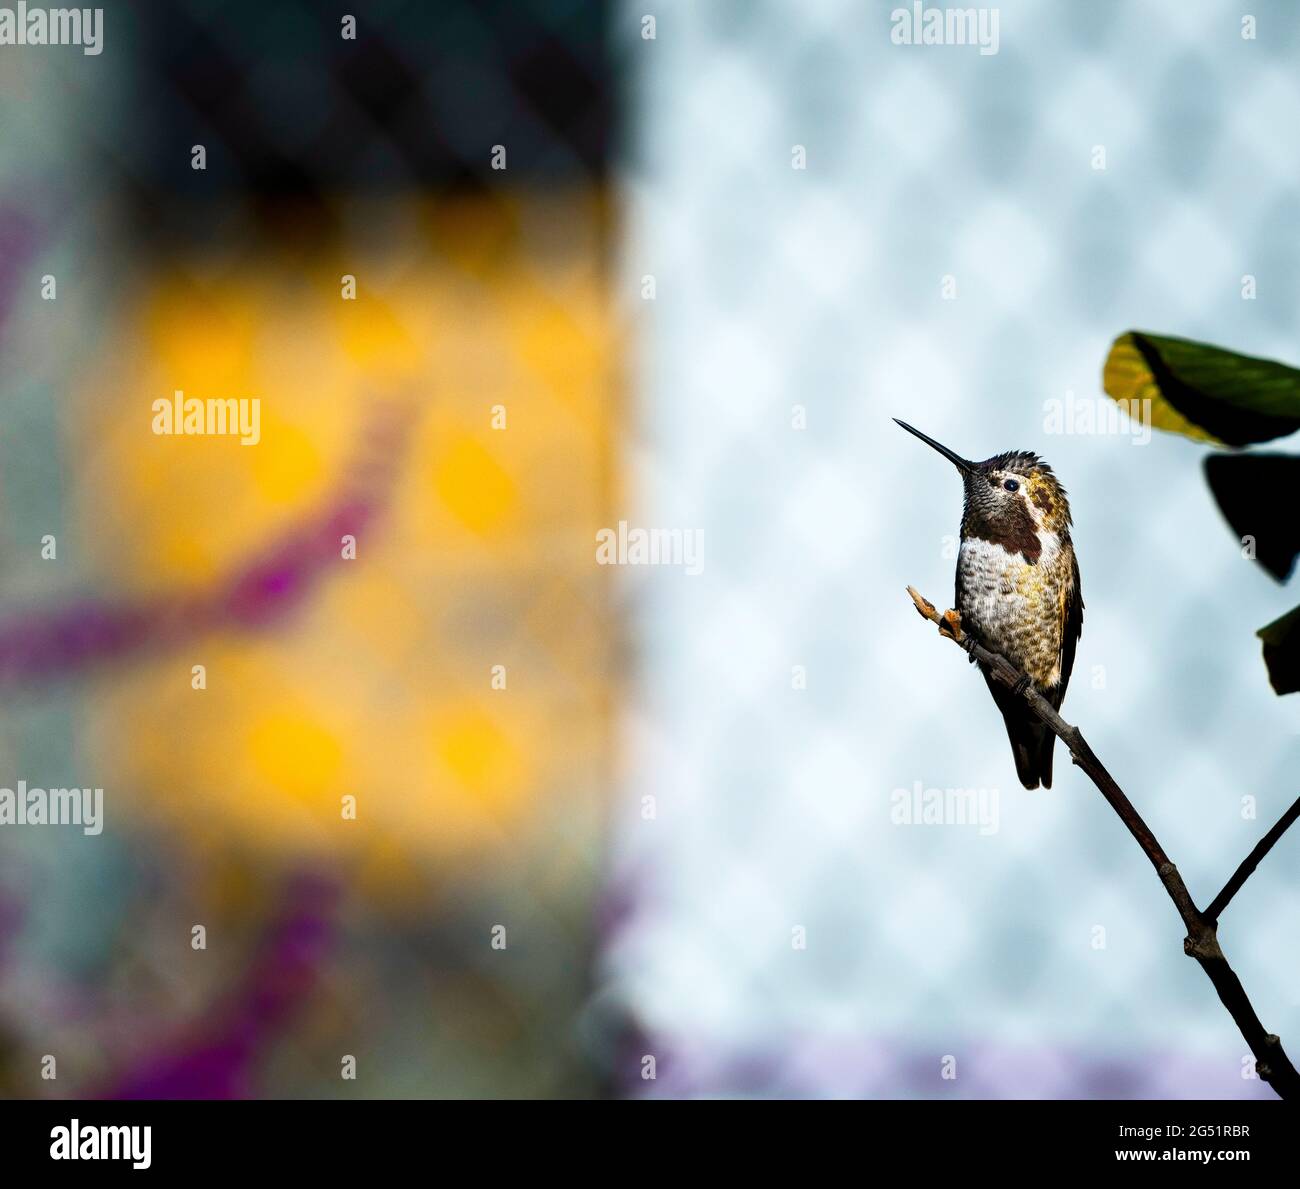 Hummingbird perching on twig Banque D'Images